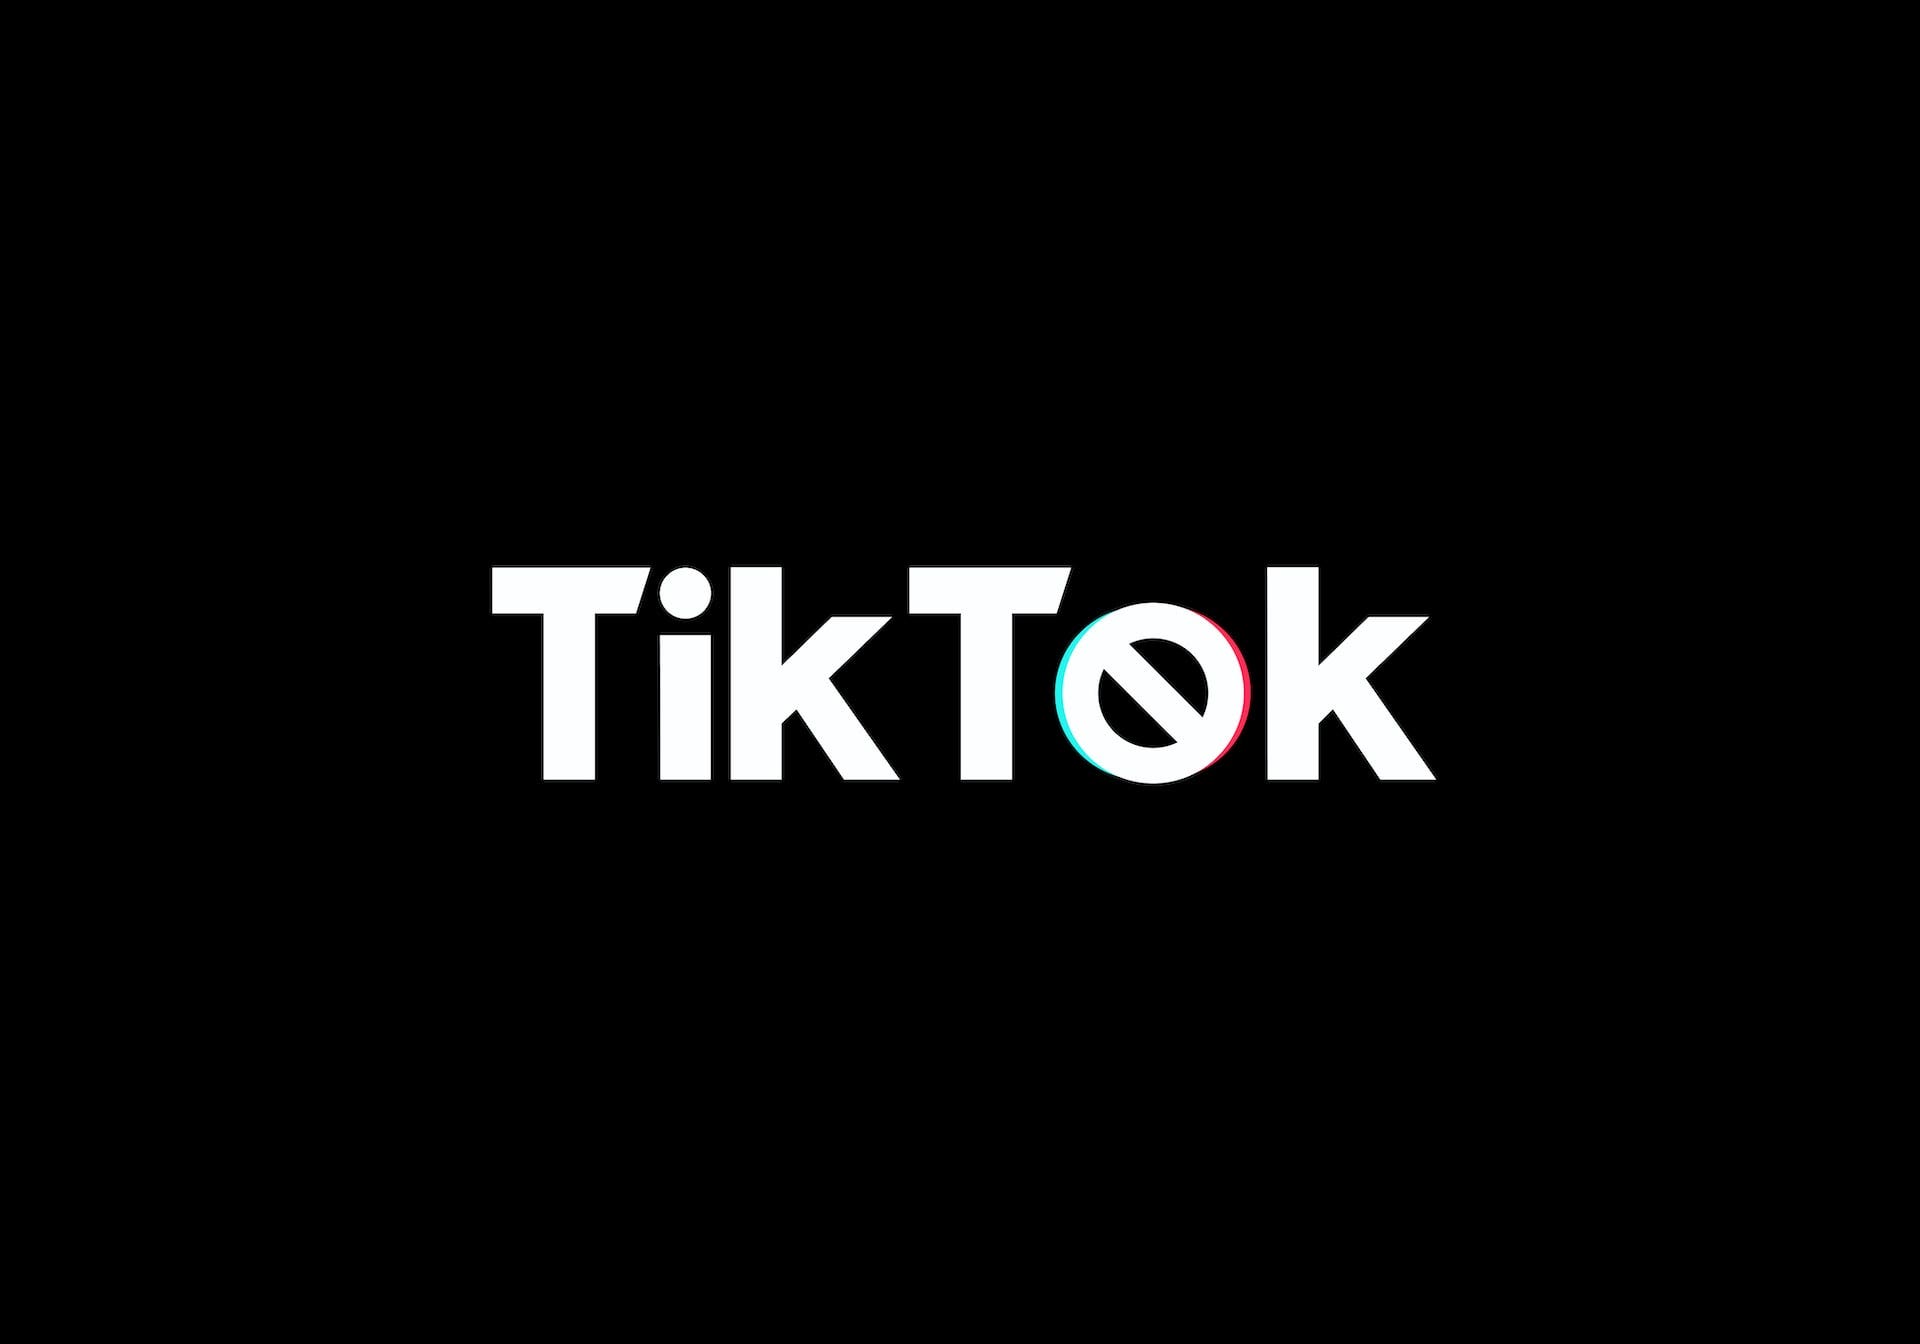 Will TikTok Get Banned? CEO To Address Security Worries As House Panel Mulls Vote